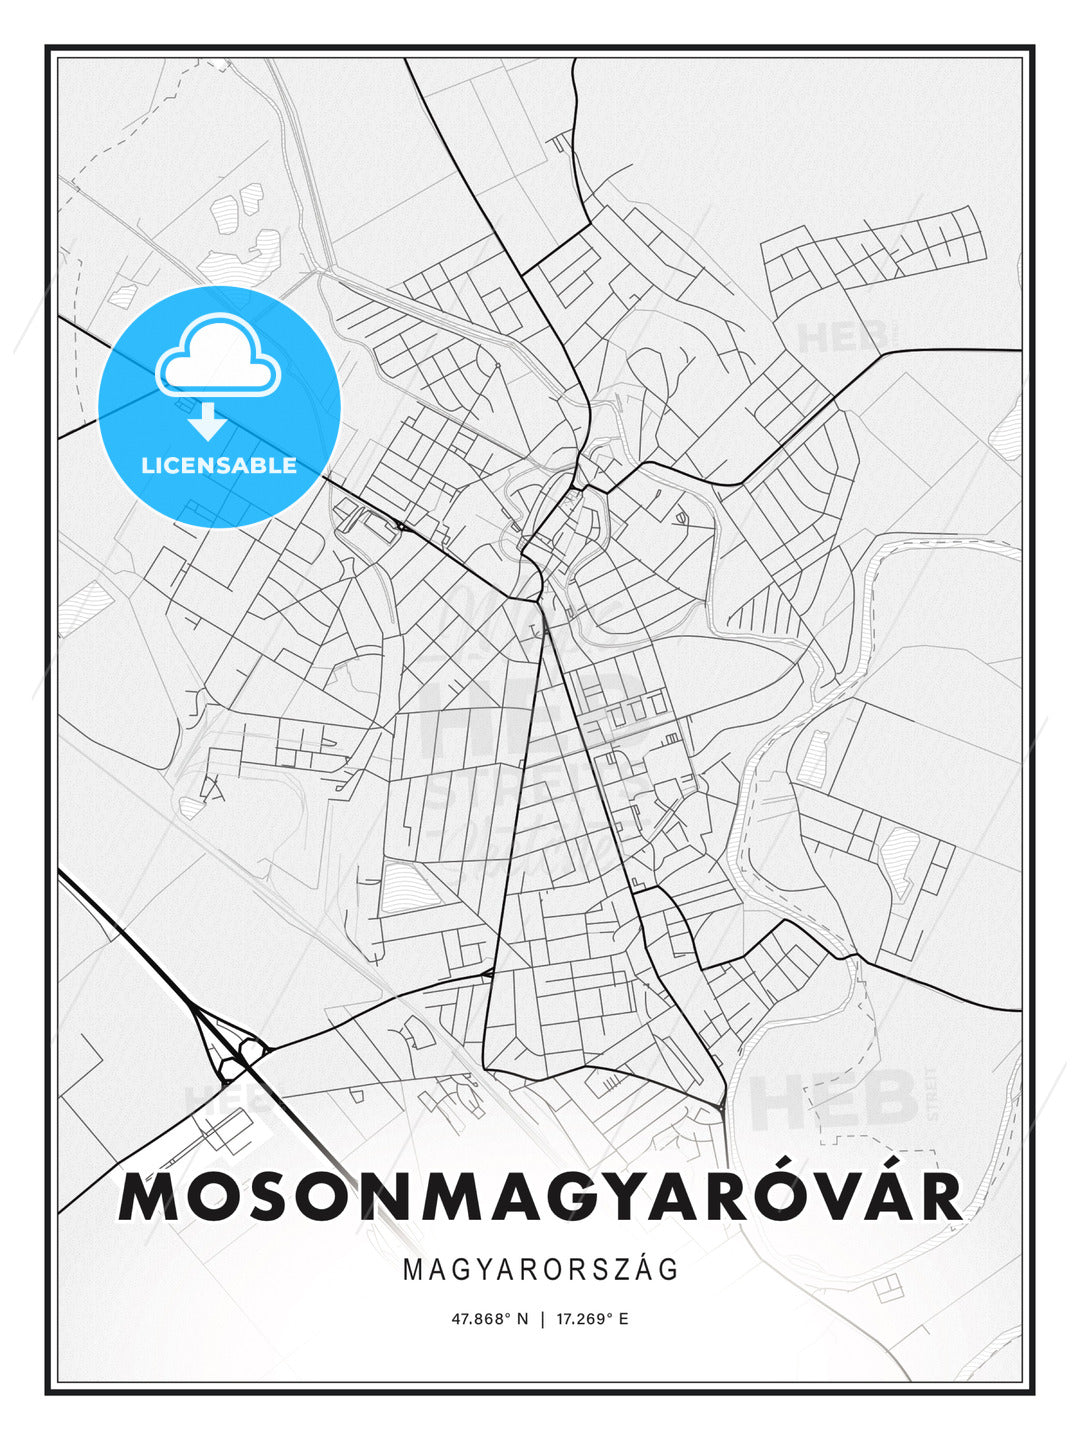 Mosonmagyaróvár, Hungary, Modern Print Template in Various Formats - HEBSTREITS Sketches